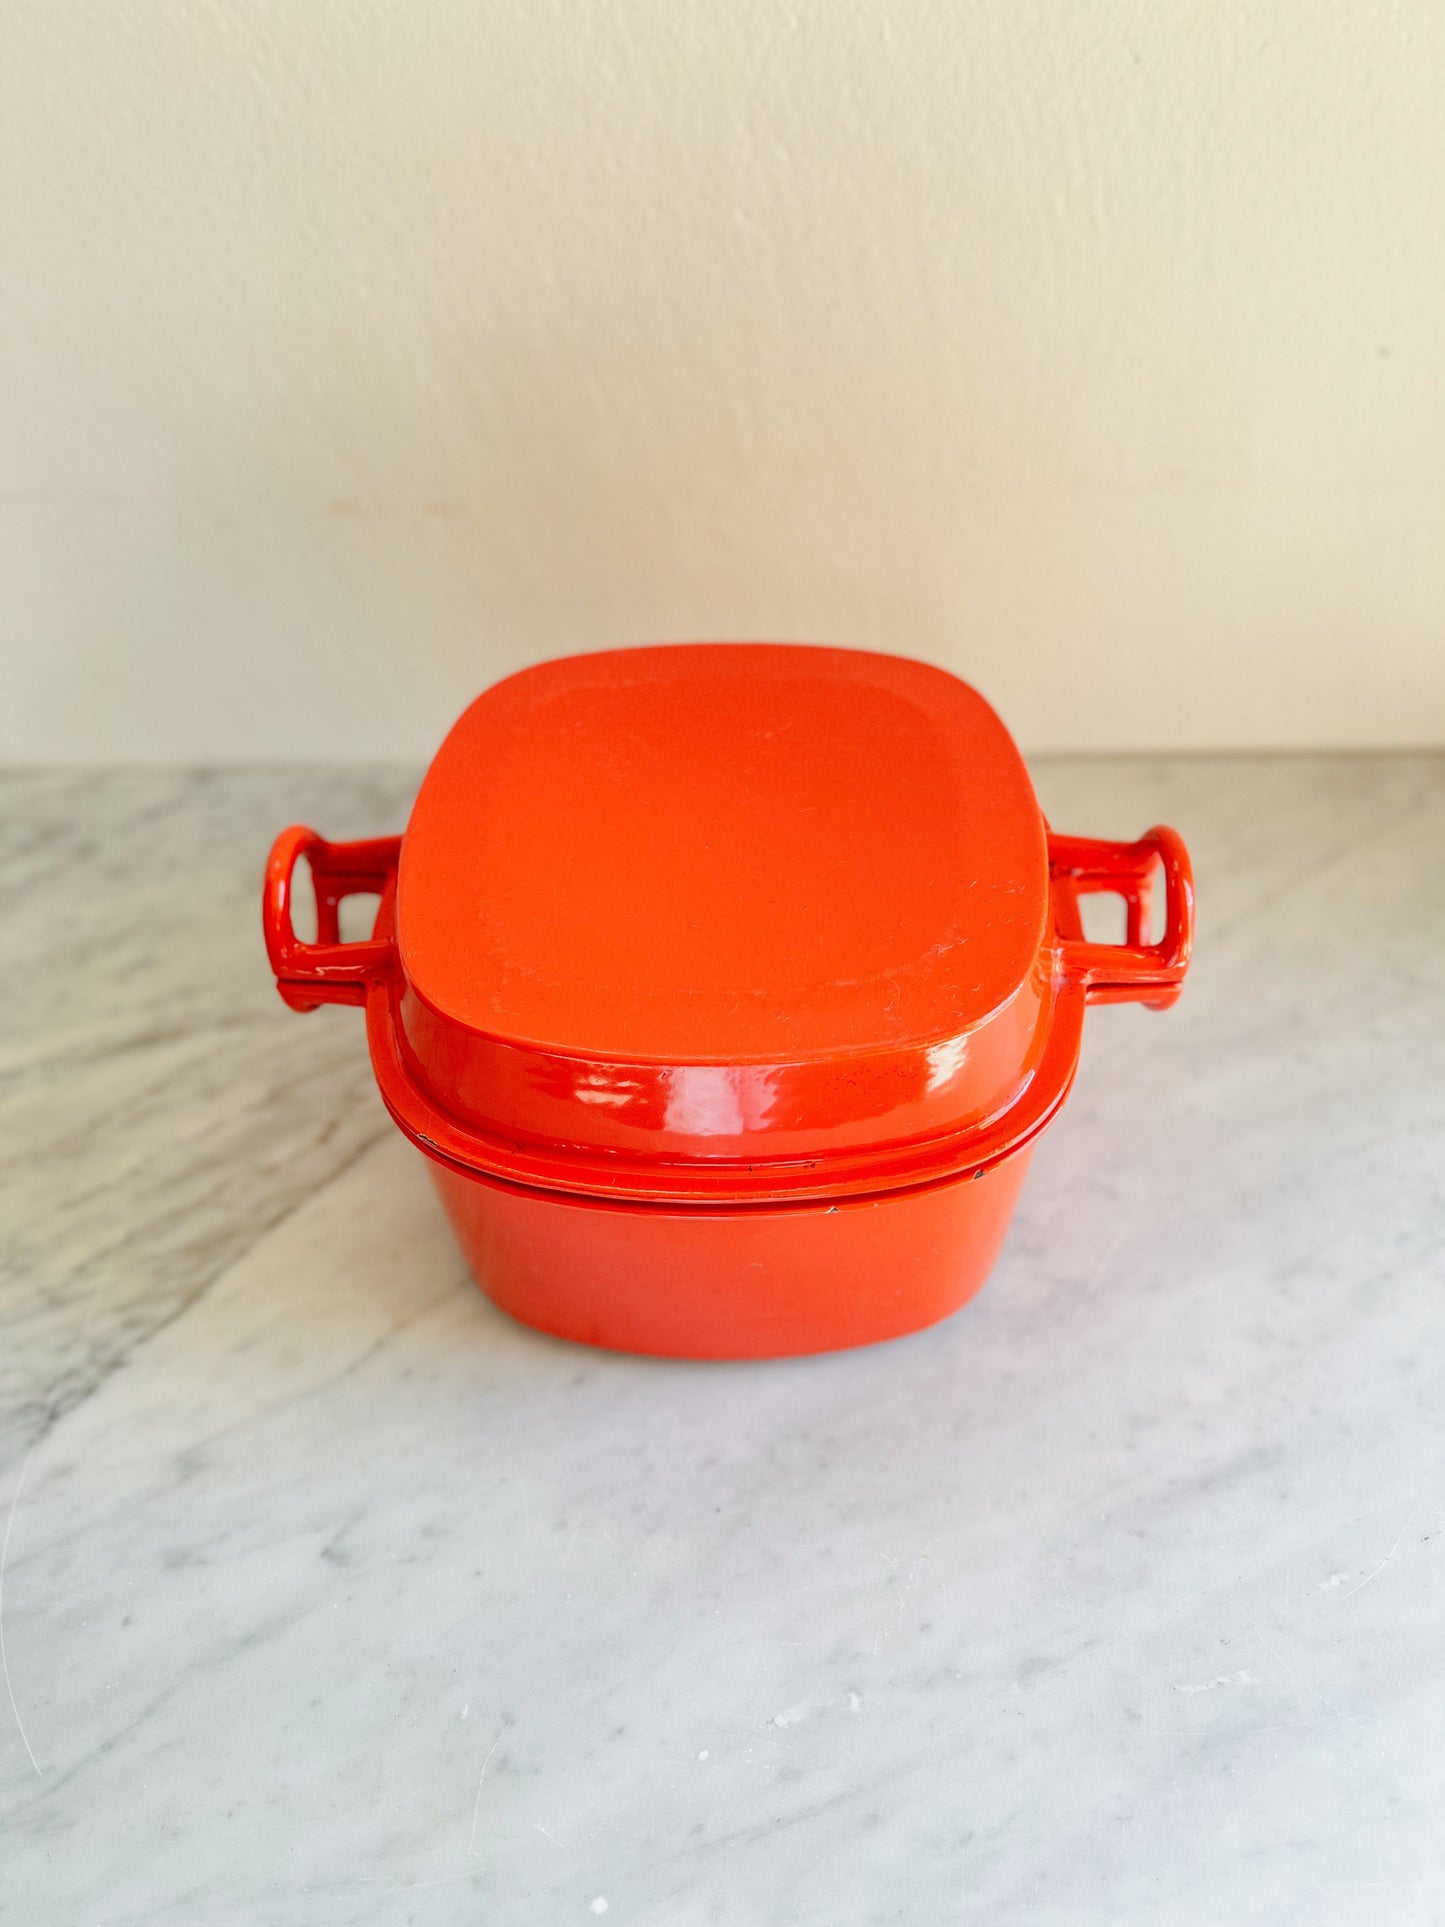 Dansk Orecast Pot by Jens Quistgaard JHQ, Midcentury Enamel Pot with Cast Iron base, Vintage Cookware, Foodie Gift, Gift for Him or Her